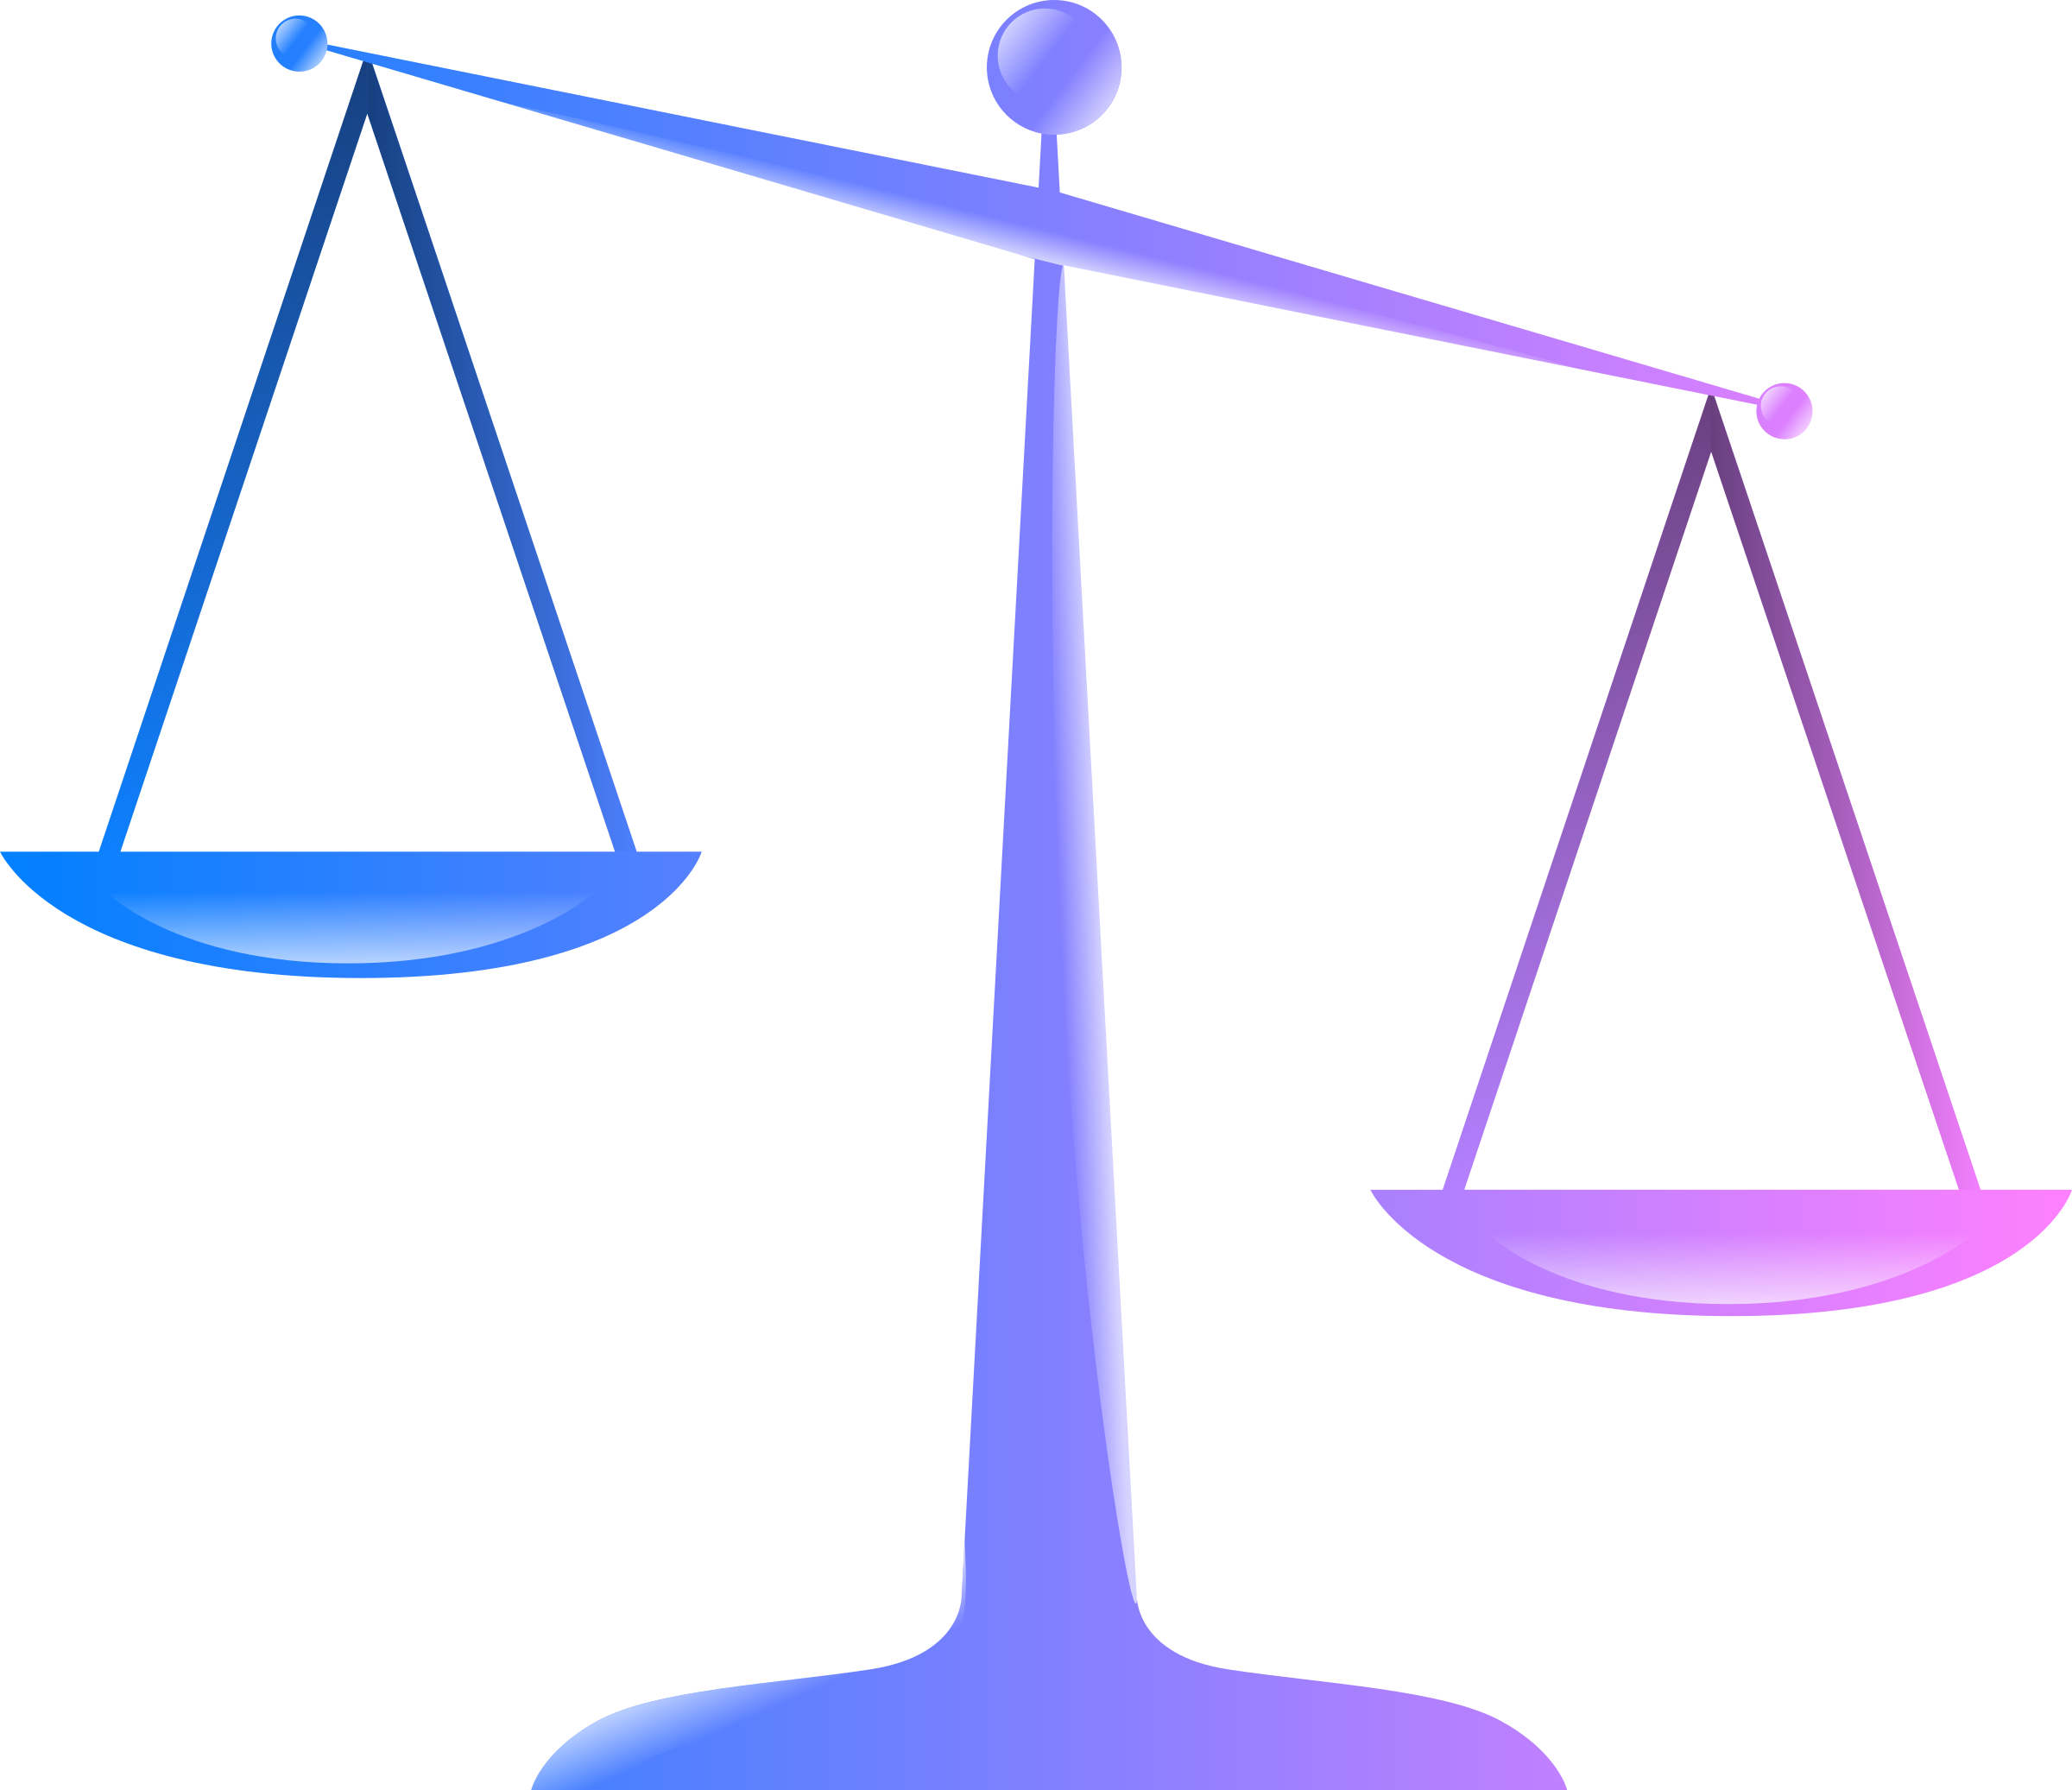 Criminal Justice Act Hearings To Be Aired Online - Scales Of Justice Clip Art (2400x2073)